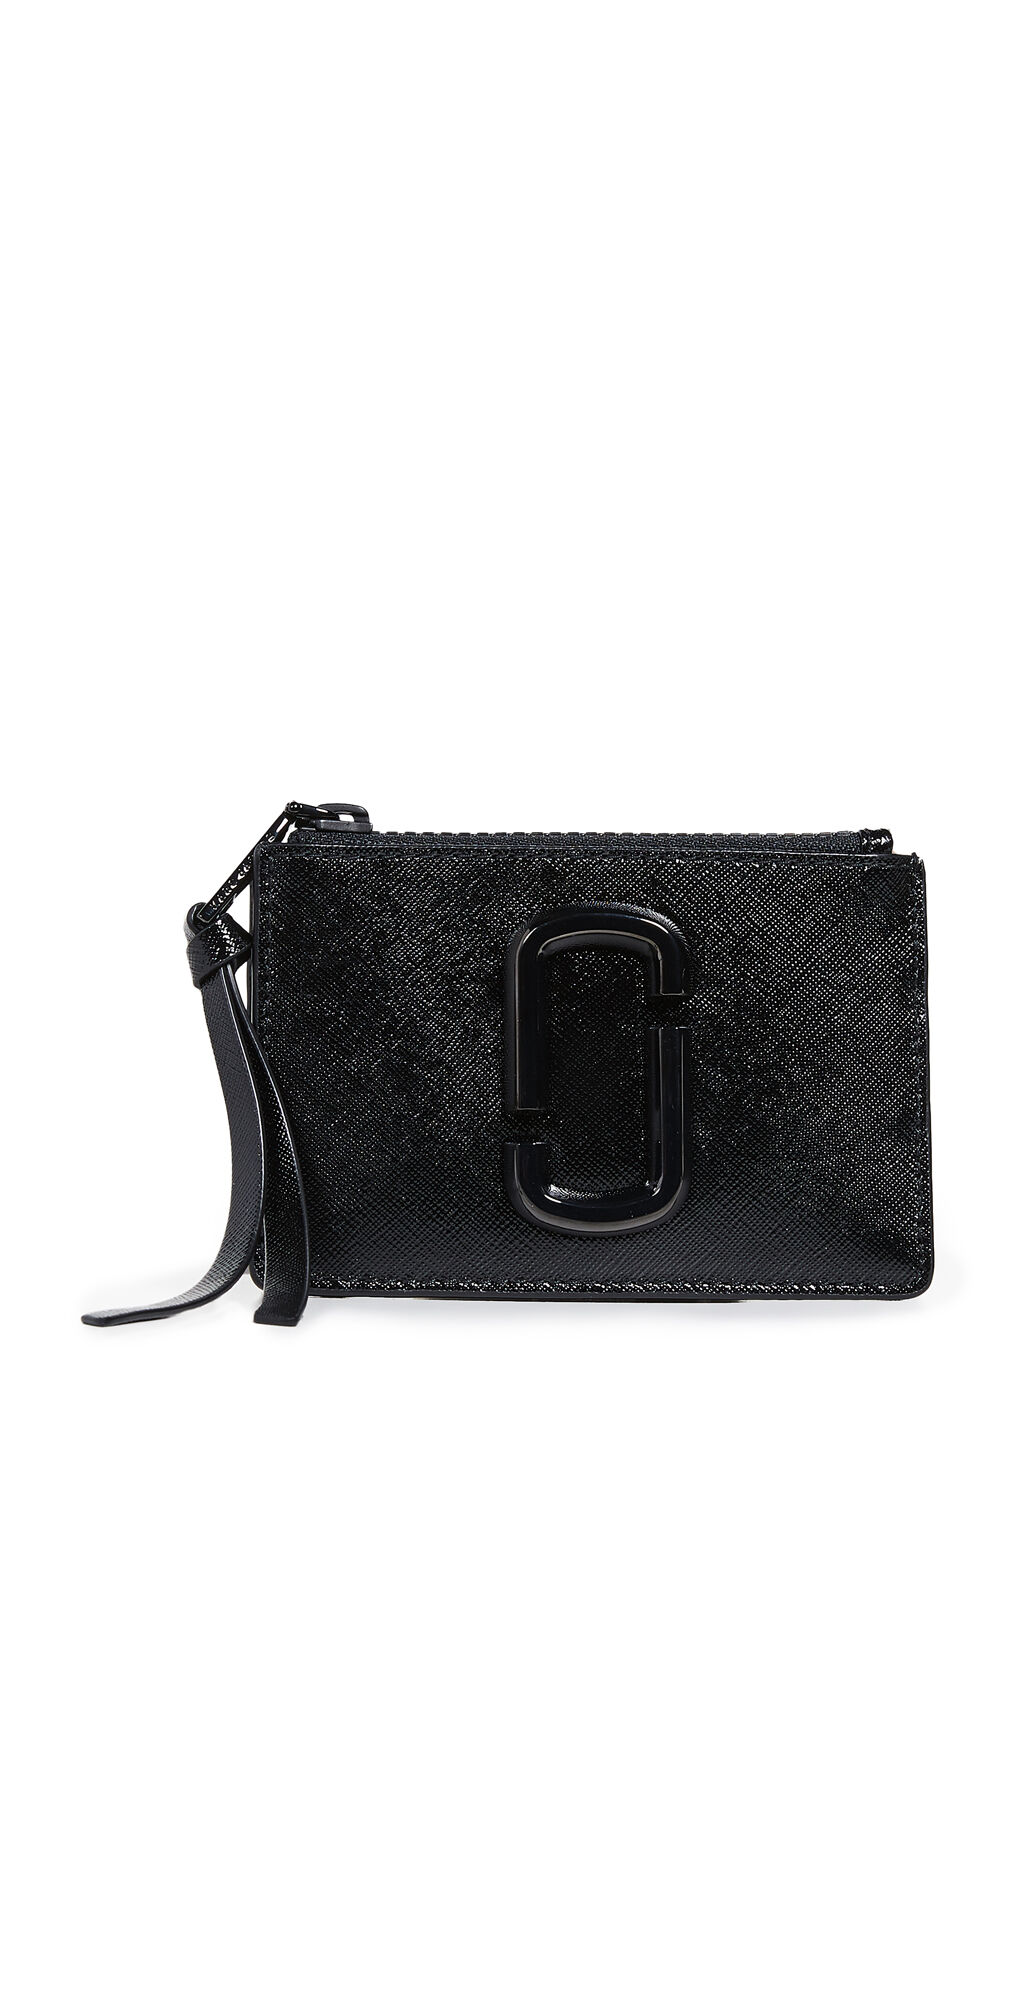 The Marc Jacobs Snapshot Top Zip Multi Wallet Black One Size  Black  size:One Size